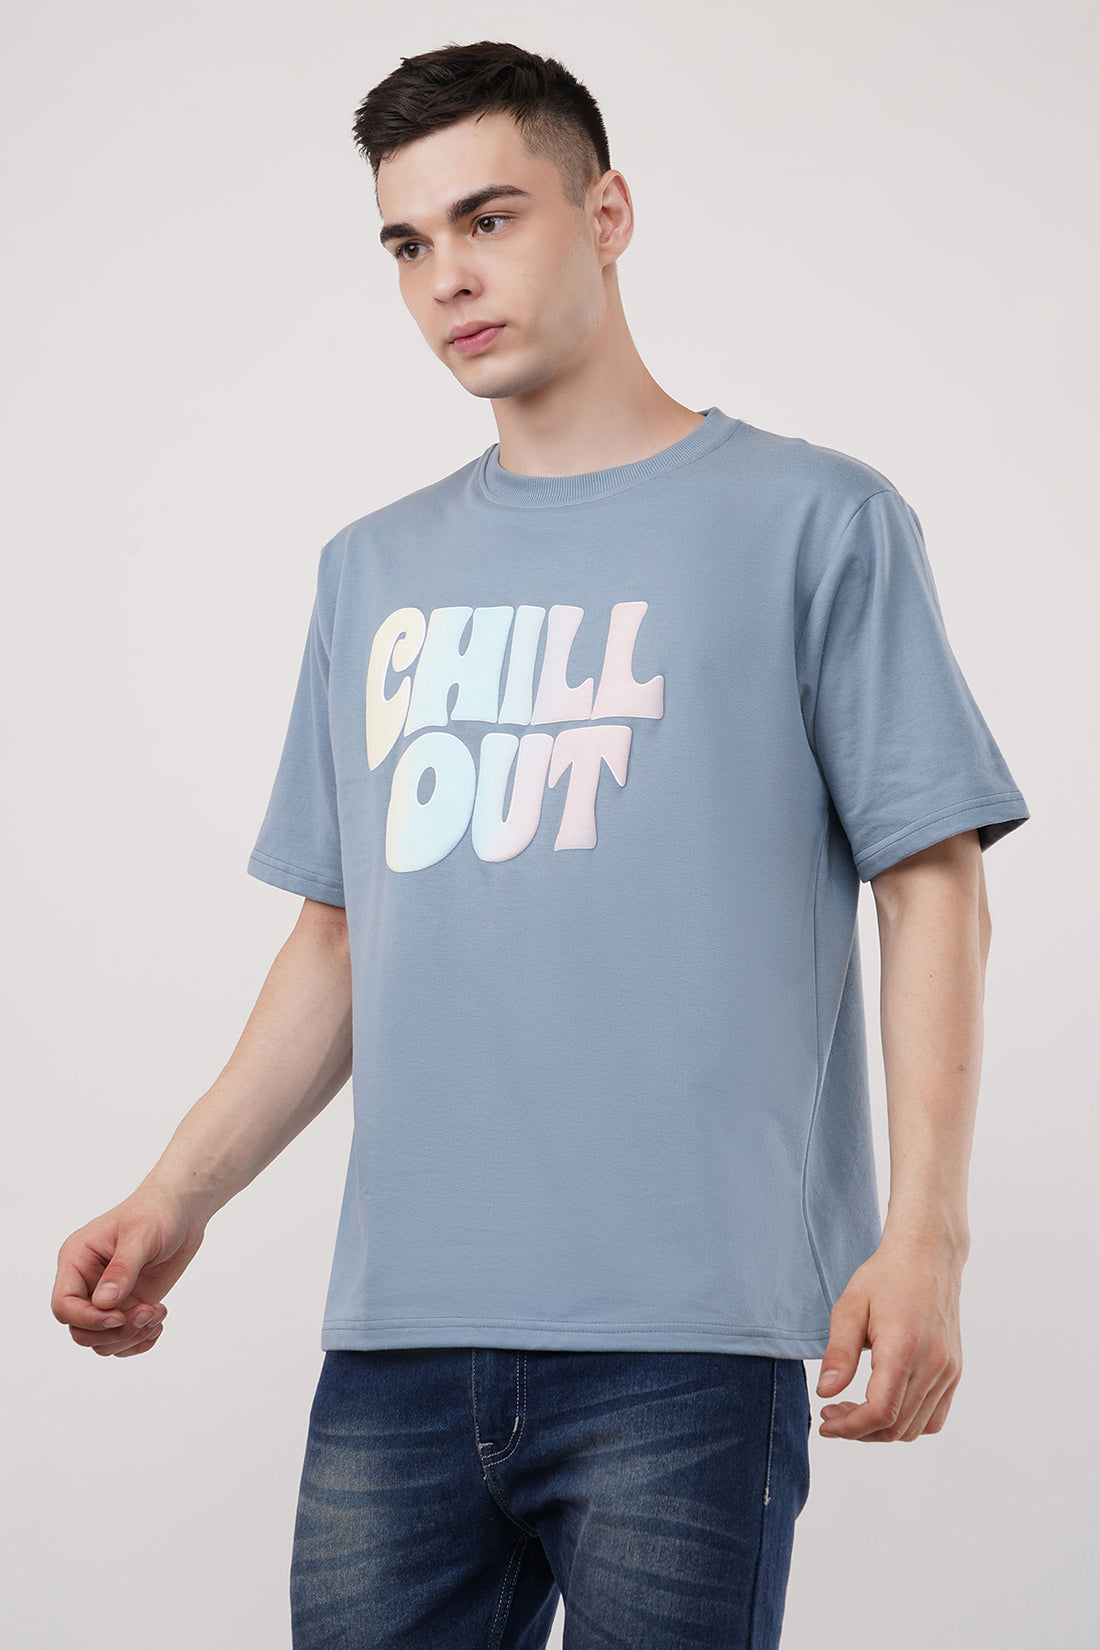 Chill Out Roundneck Half Sleeve Obersized T-Shirt in Multiple Prints